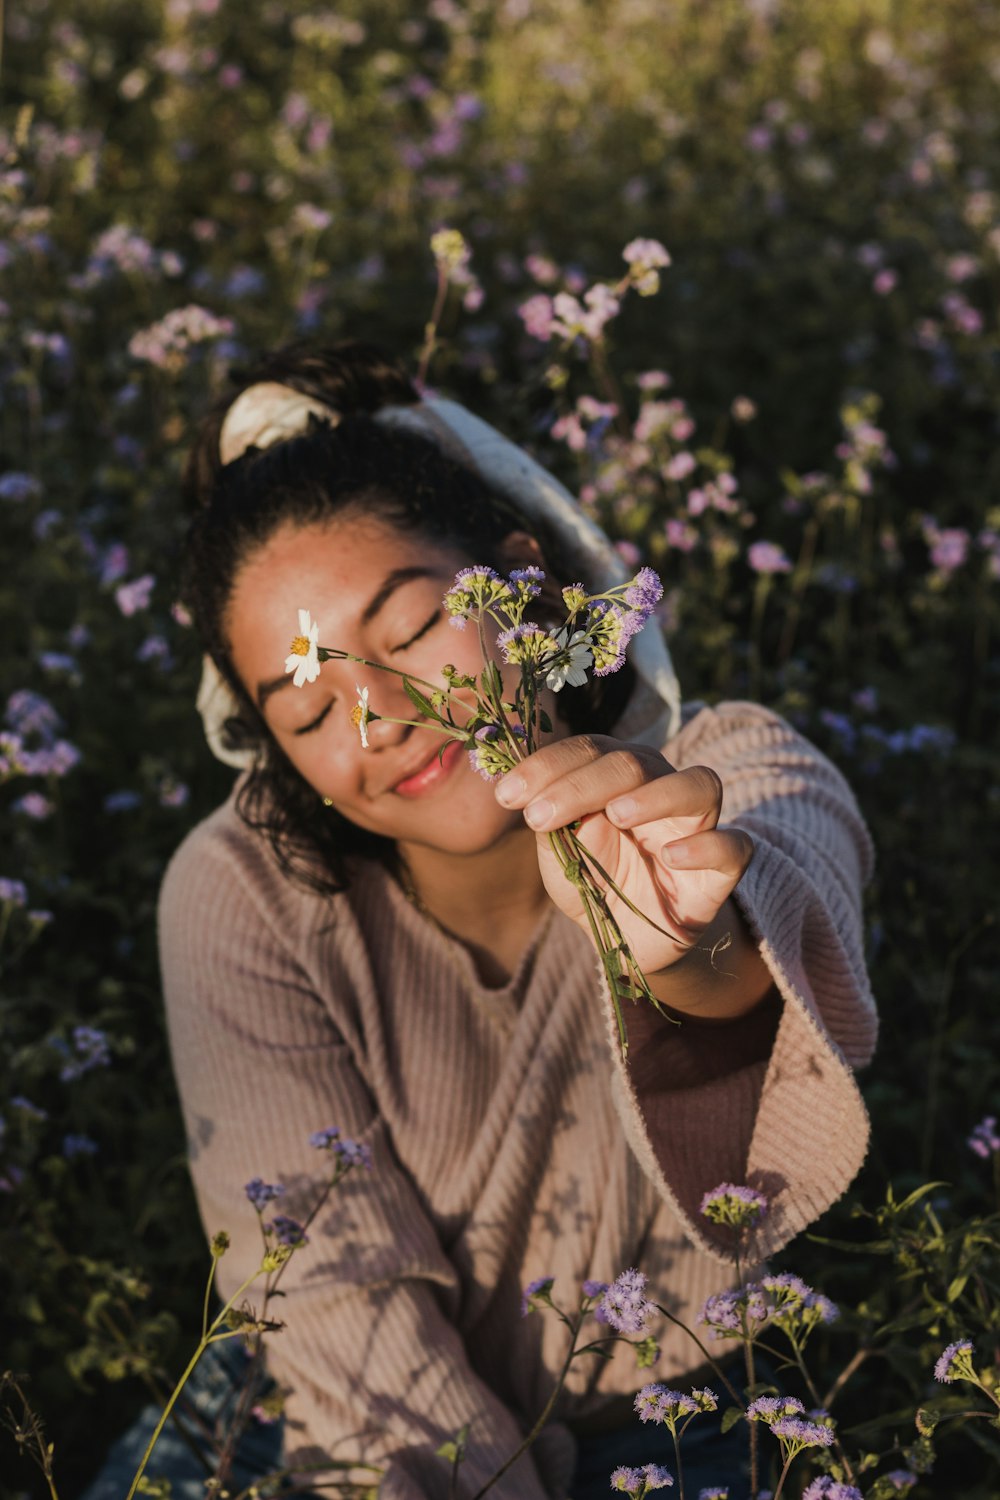 woman in gray sweater holding flowers outdoors